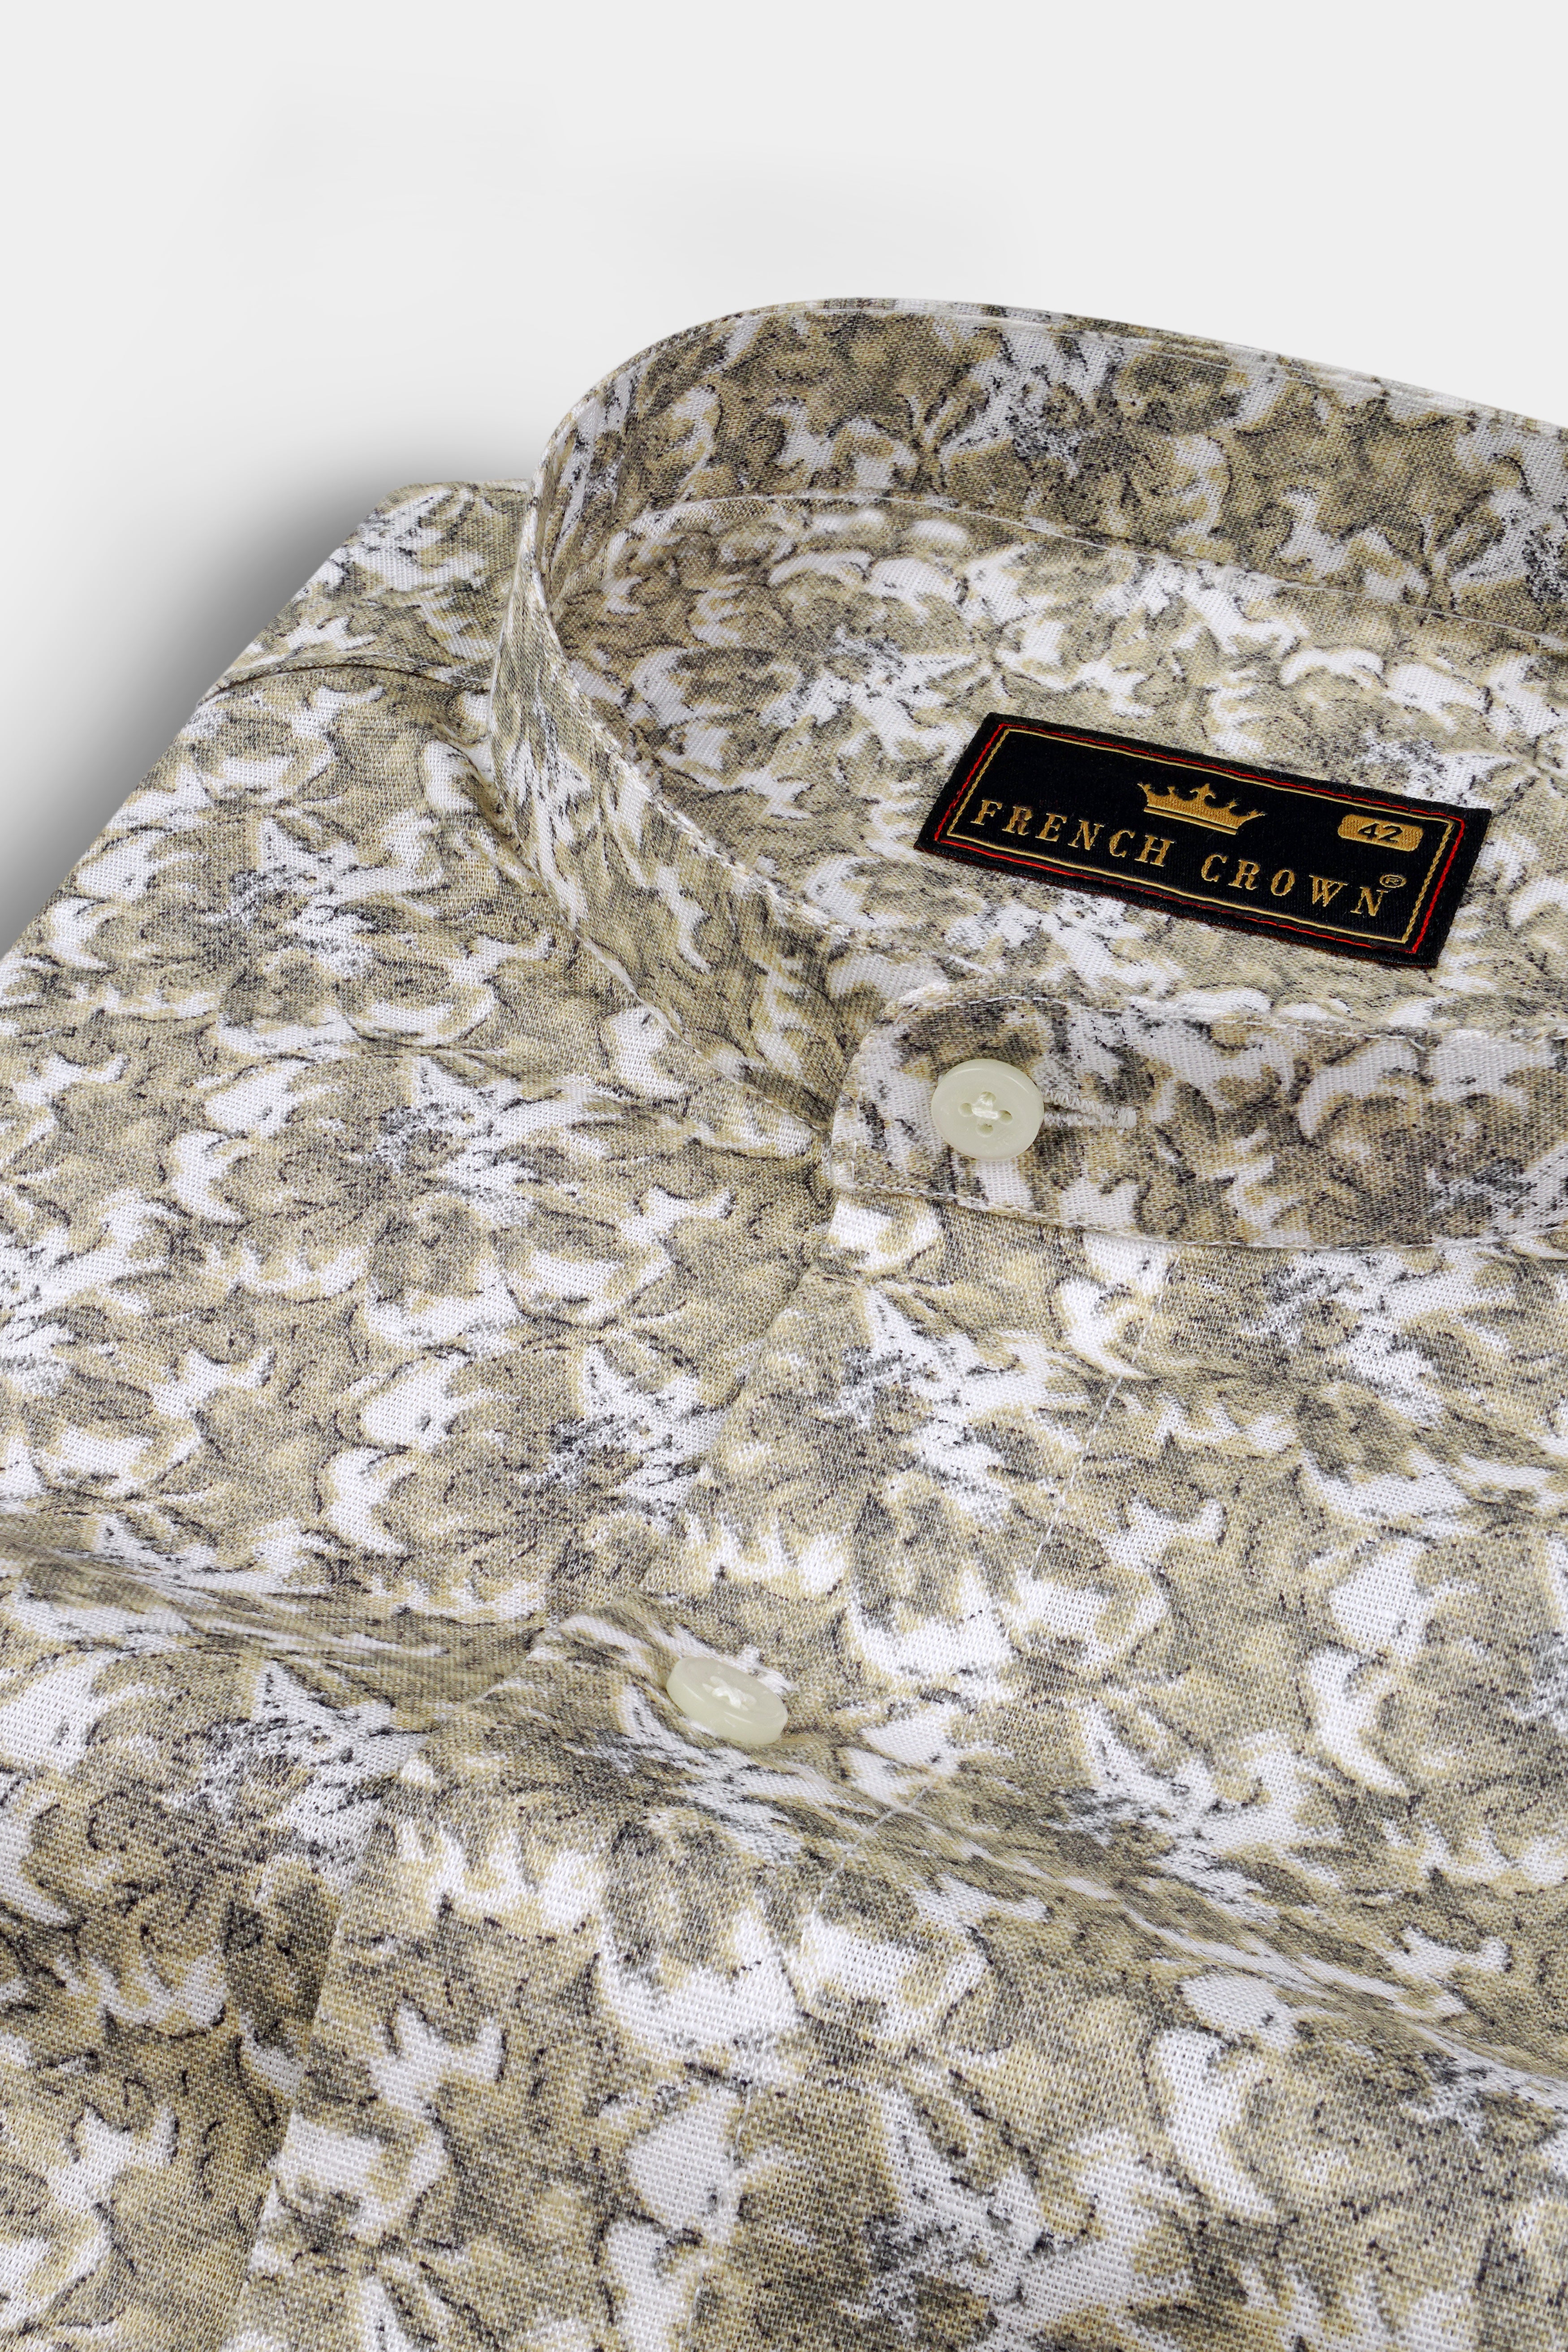 White with Tana Brown Floral print Luxurious Linen Shirt